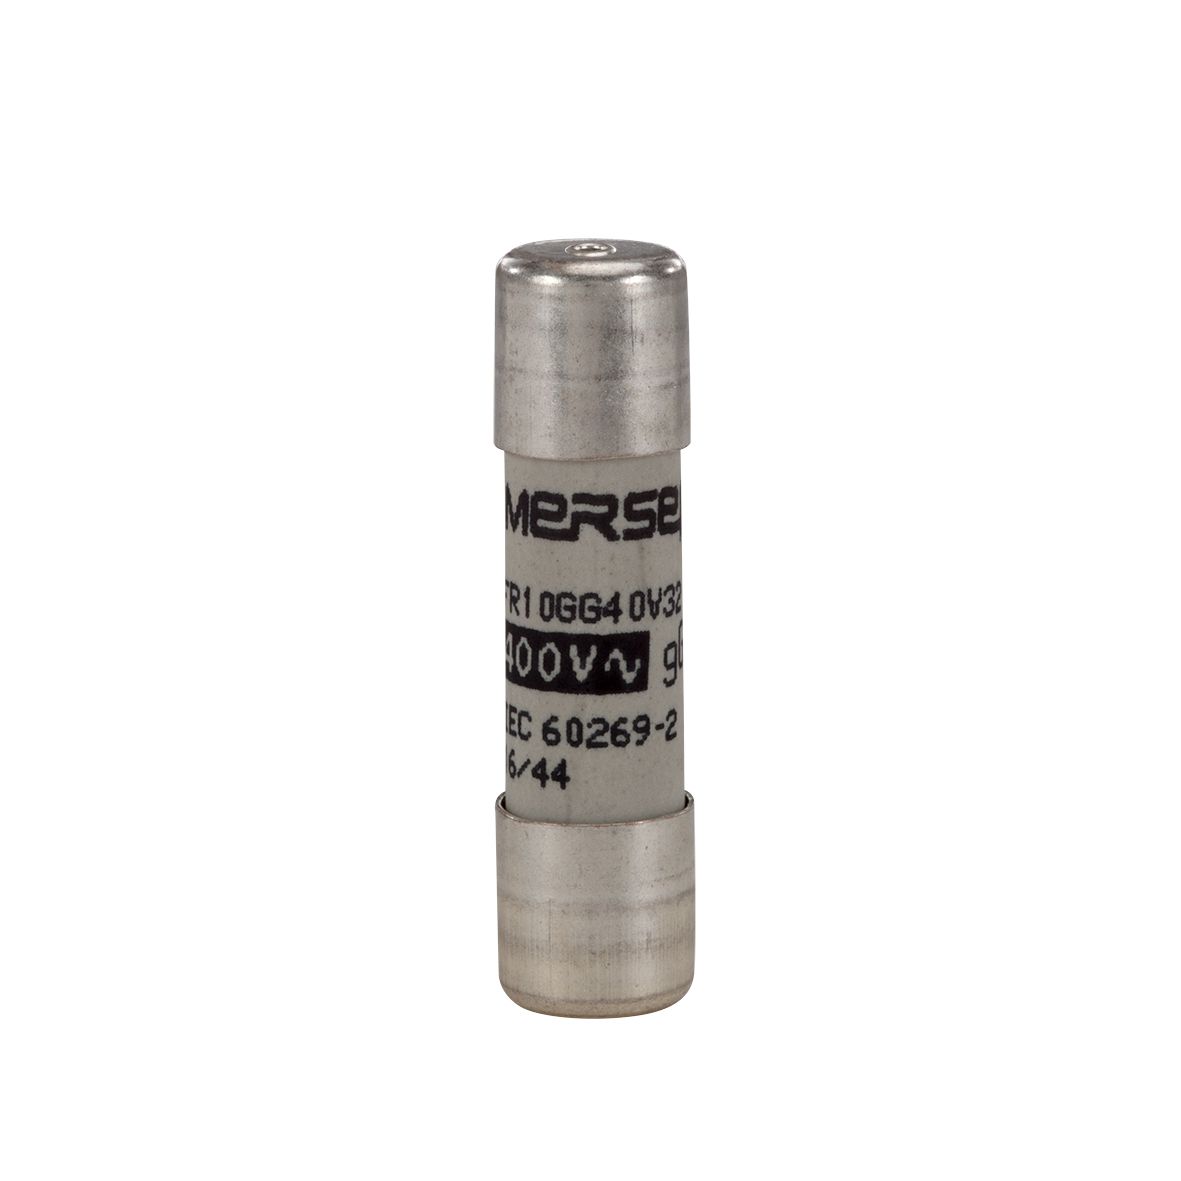 E083954 - Cylindrical fuse-link gG 250VAC 10.3x38, 32A with striker